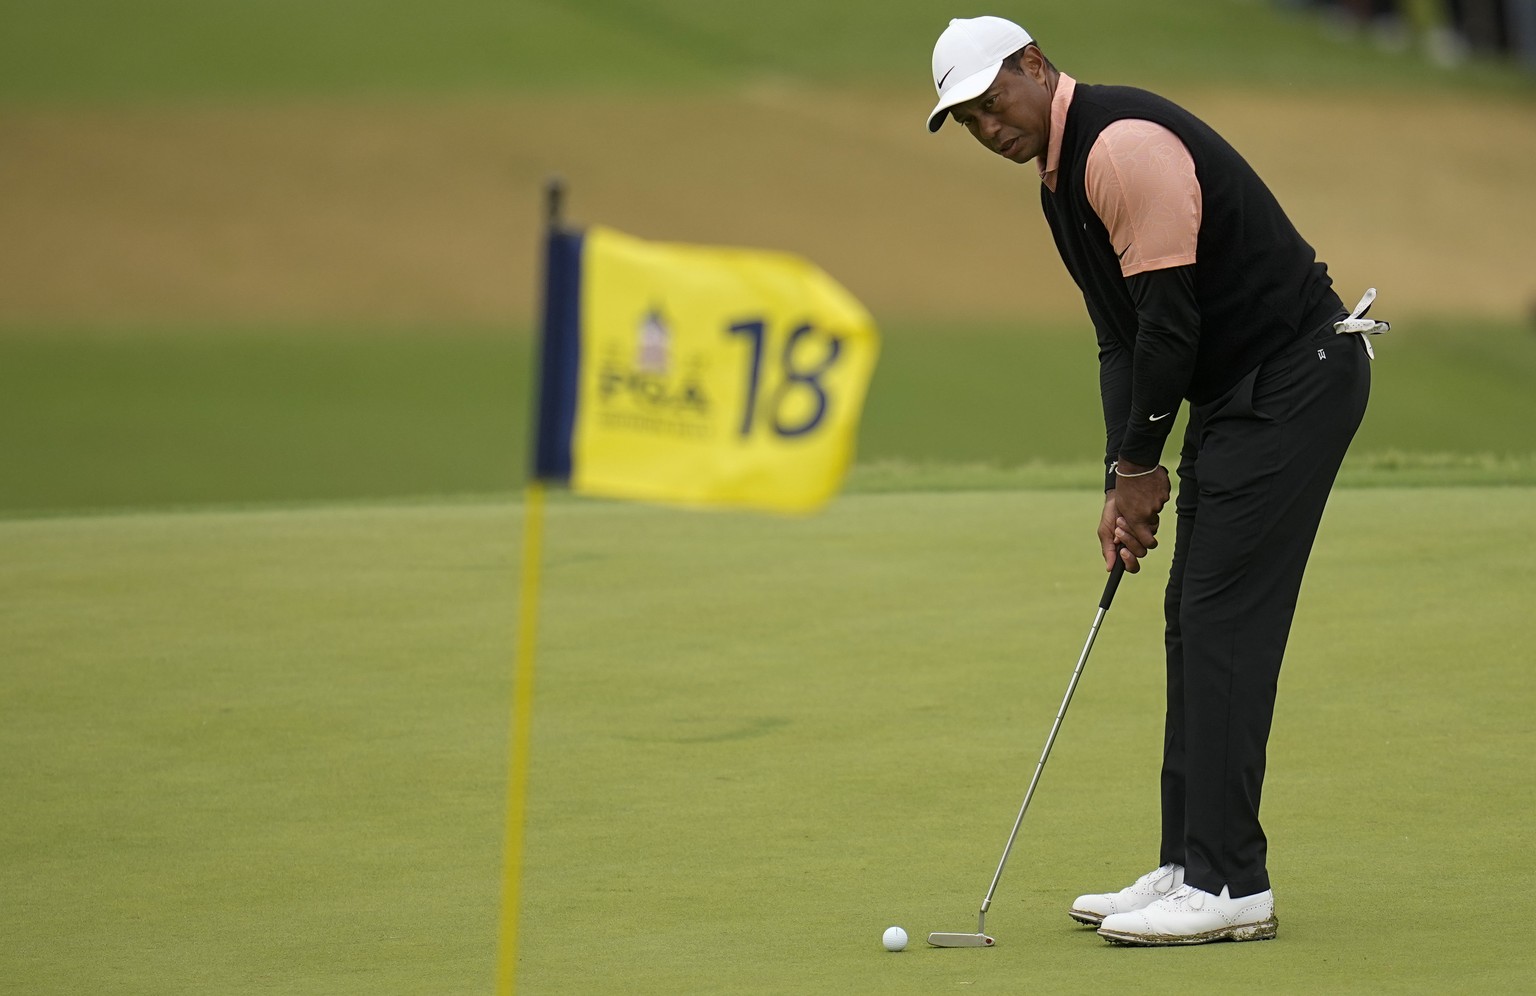 Tiger Woods putts on the 18th hole during the third round of the PGA Championship golf tournament at Southern Hills Country Club, Saturday, May 21, 2022, in Tulsa, Okla. (AP Photo/Sue Ogrocki)